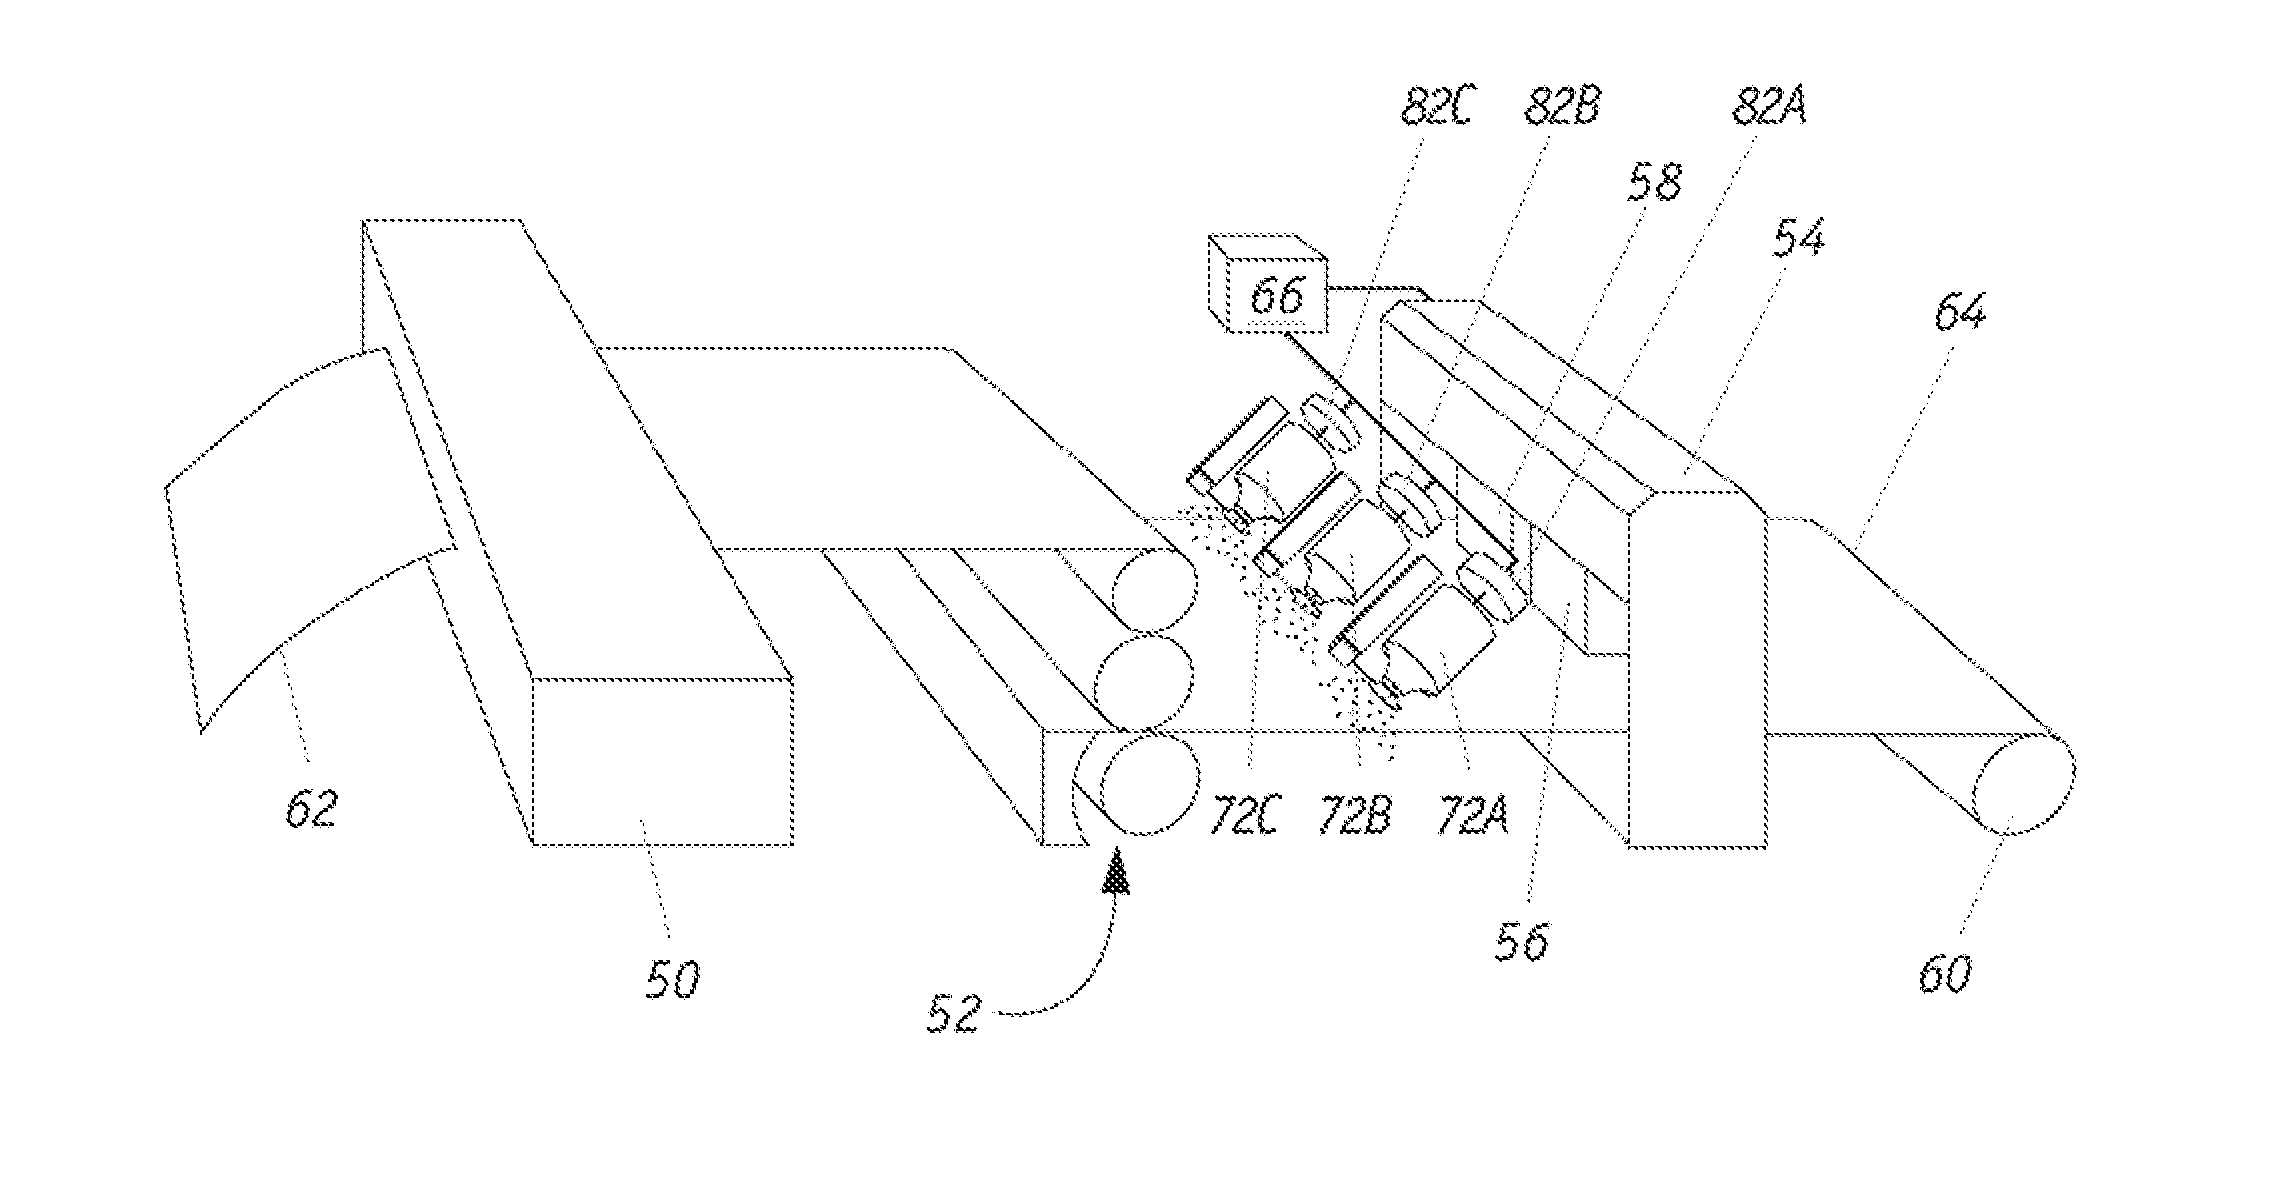 Method to Create Uniform Distribution, Minimize Applied Solution Volume and Control Droplet Size of Water and/or Coating Applications for Web Applications